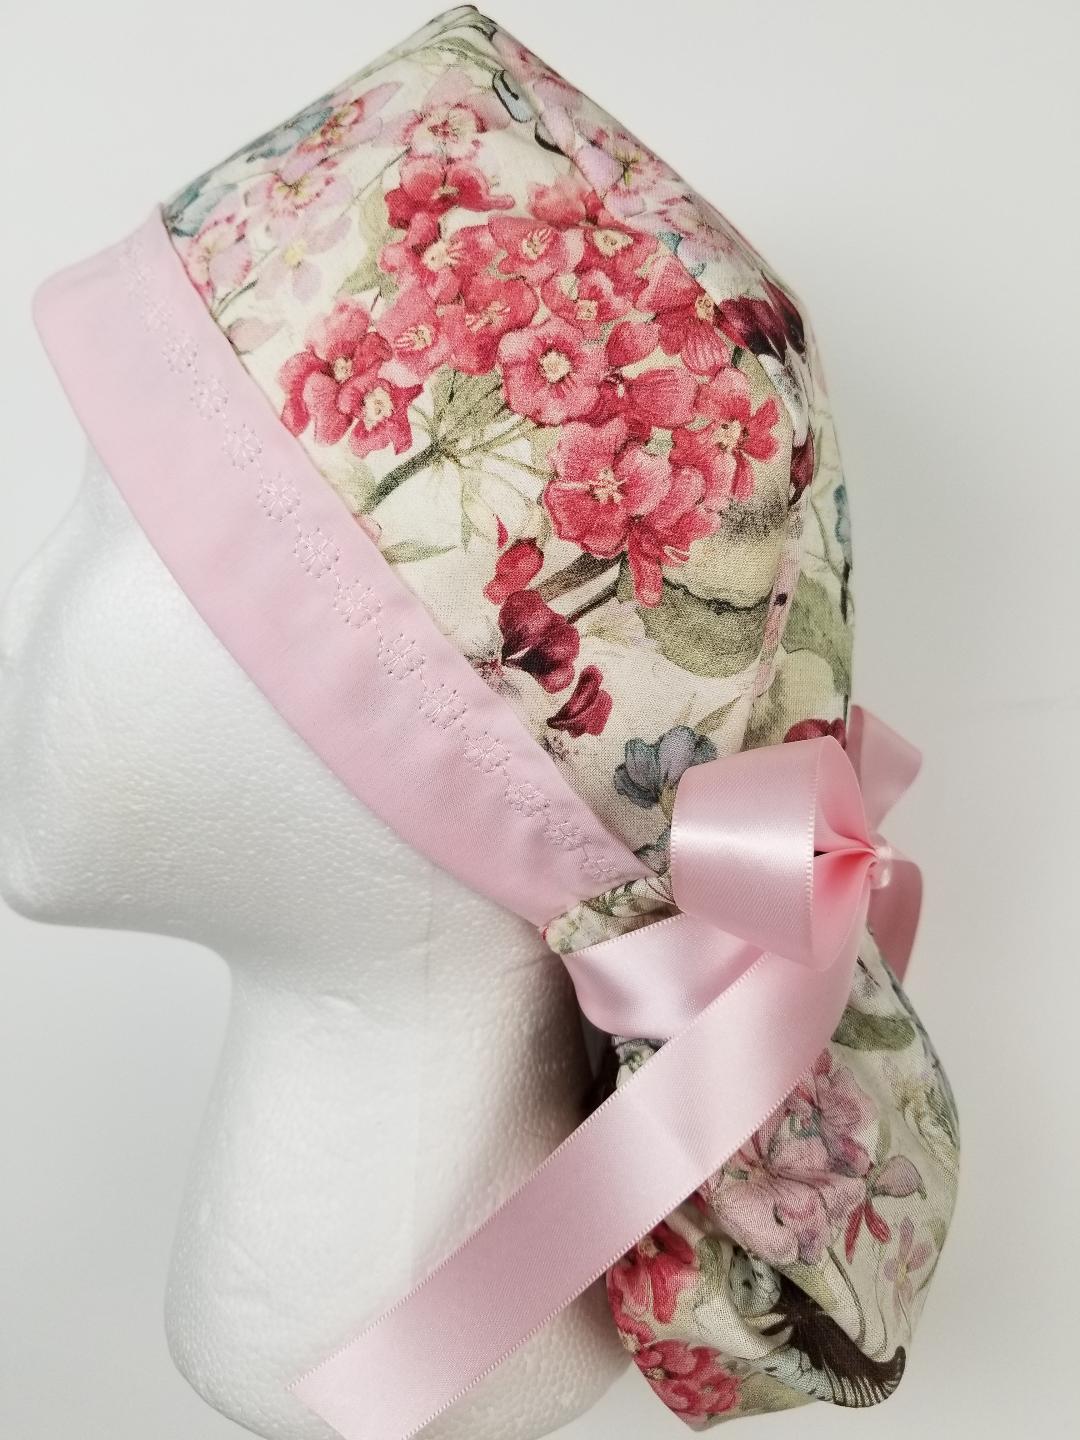 Surgical Ponytail Cap / HEADBAND with DESIGNER STITCHING 4 Fabric Choices